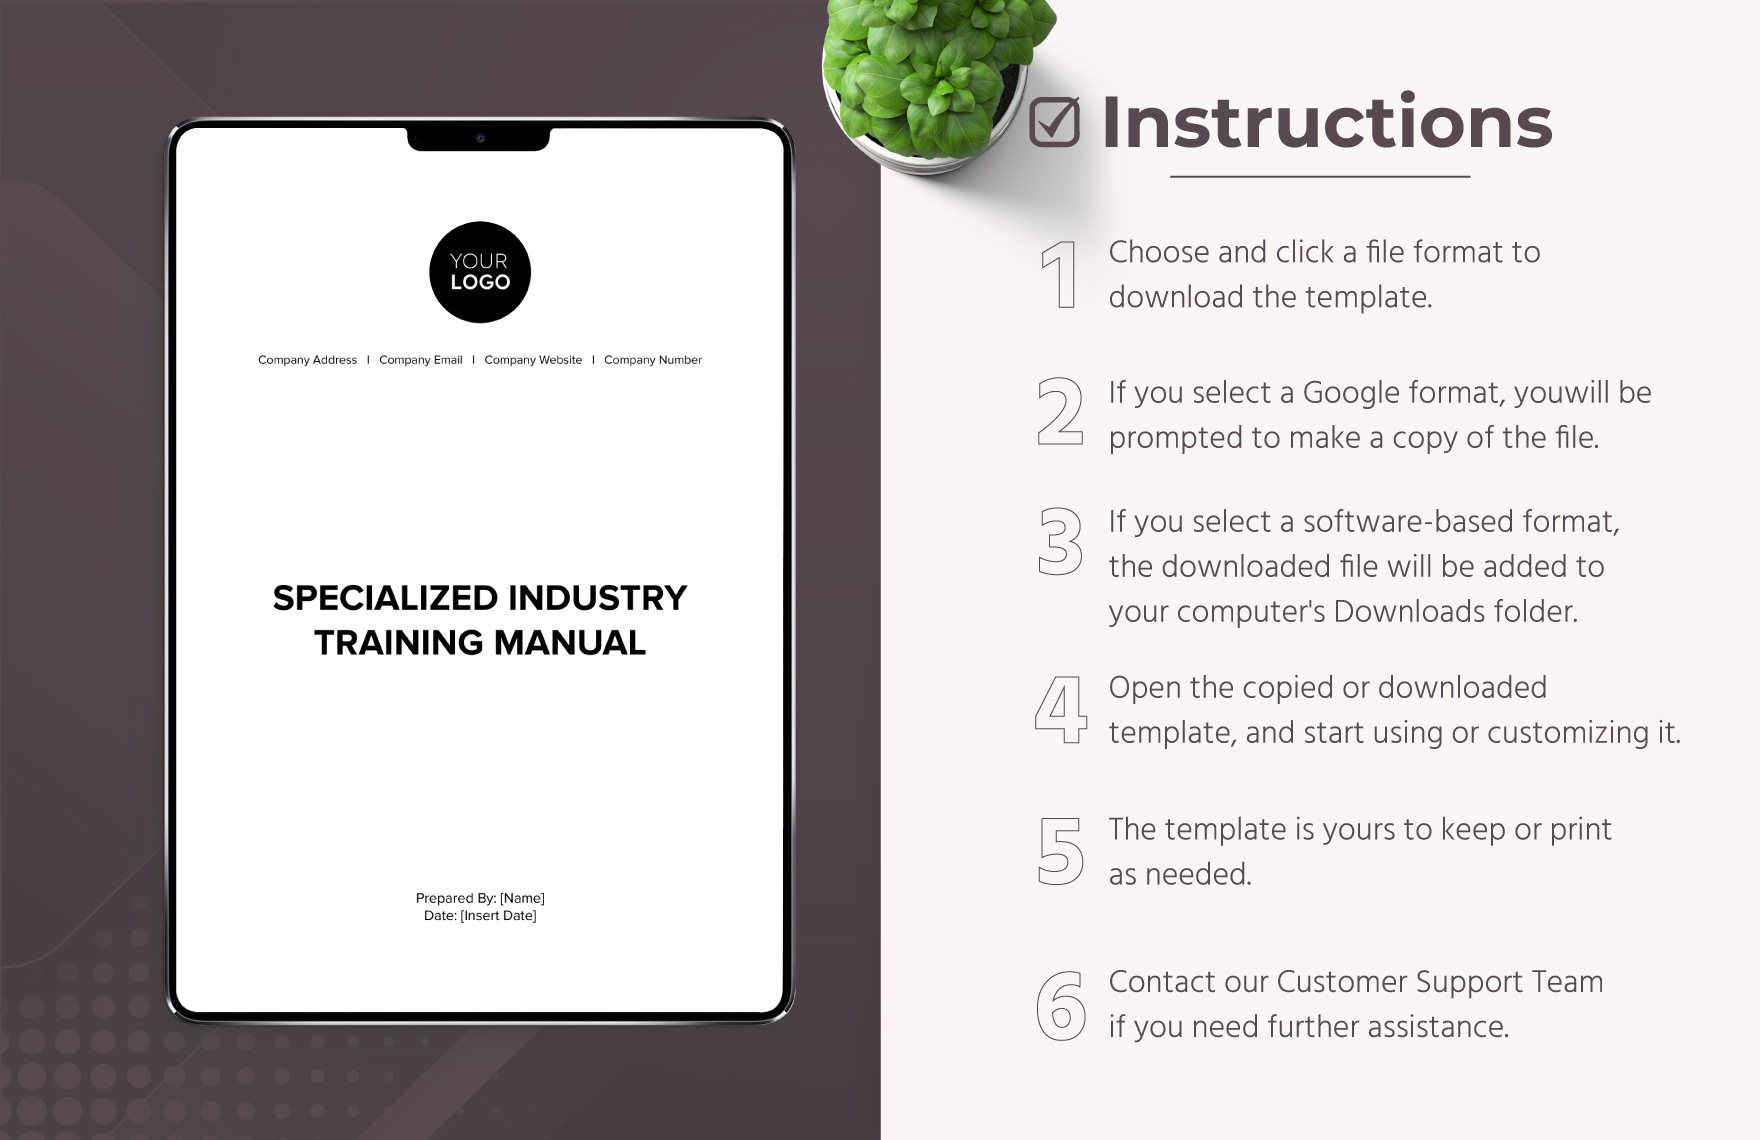 Specialized Industry Training Manual HR Template